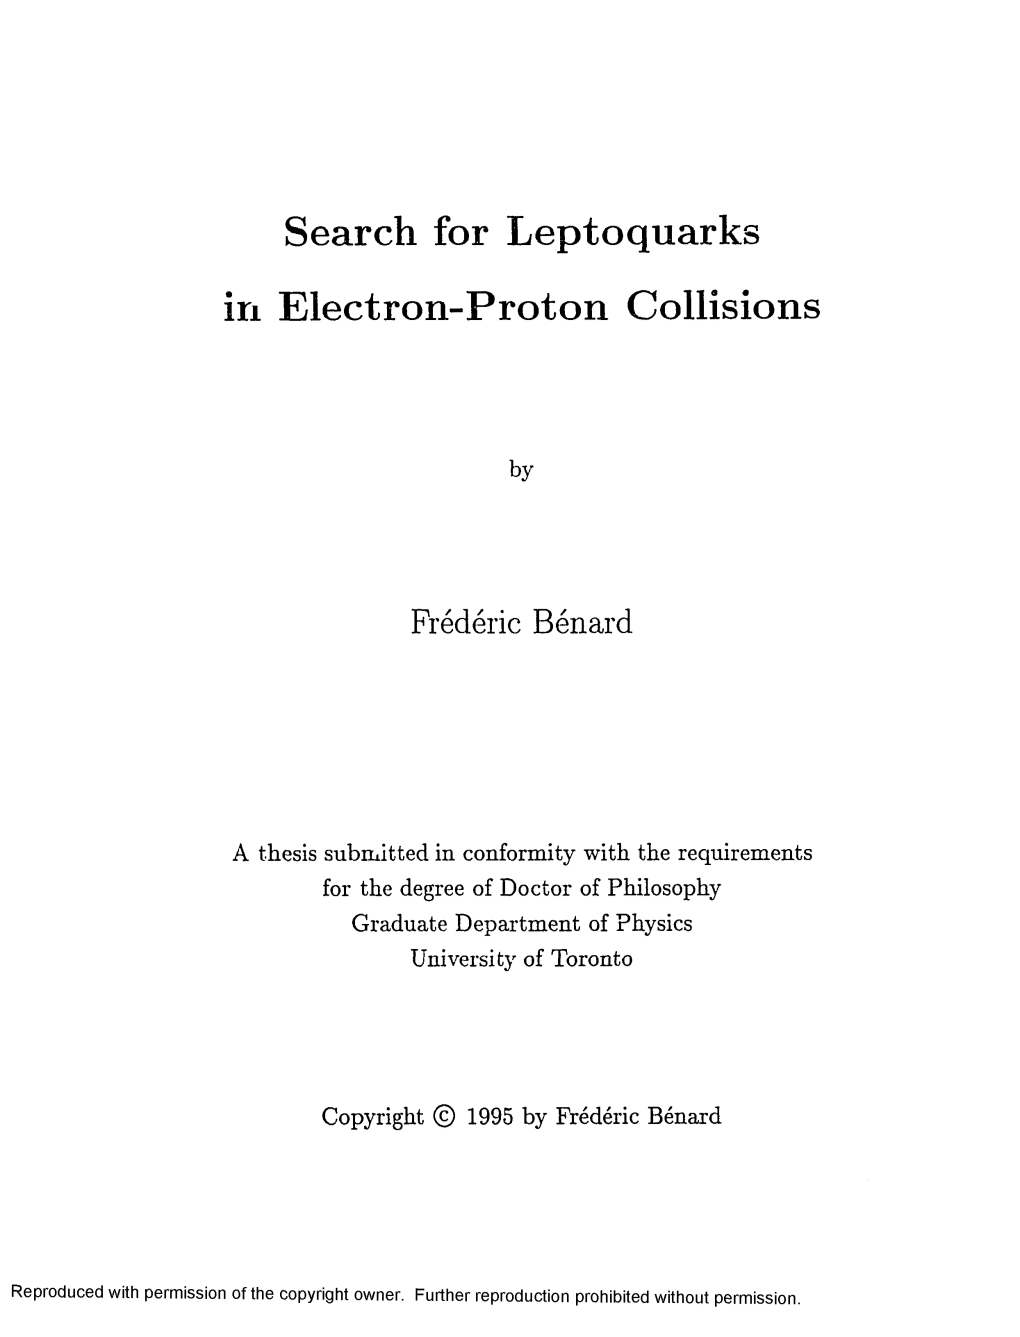 Search for Leptoquarks in Electron-Proton Collisions